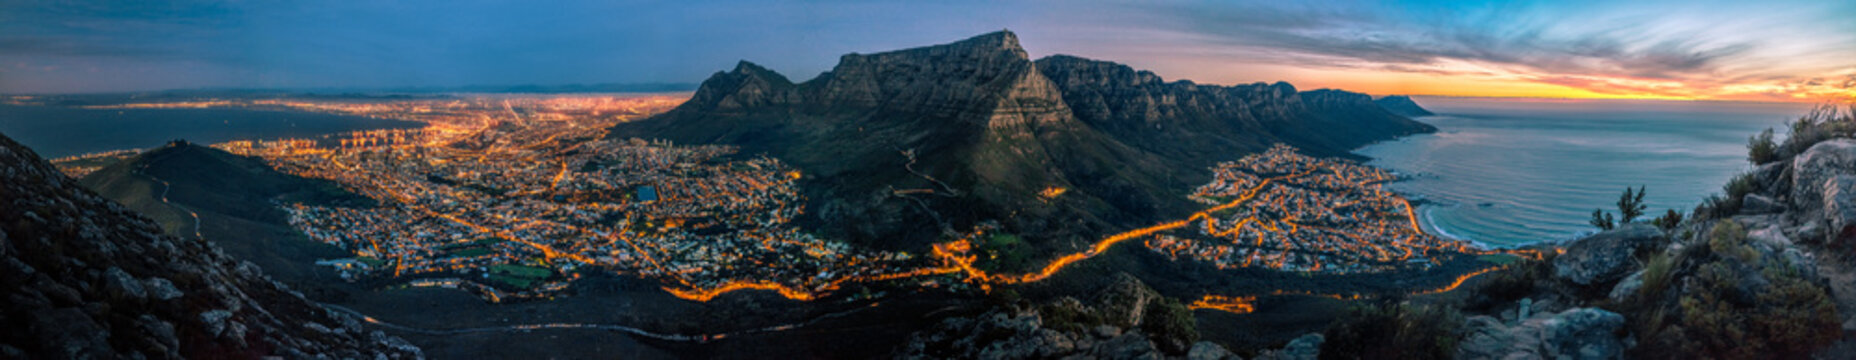 cape town at dusk